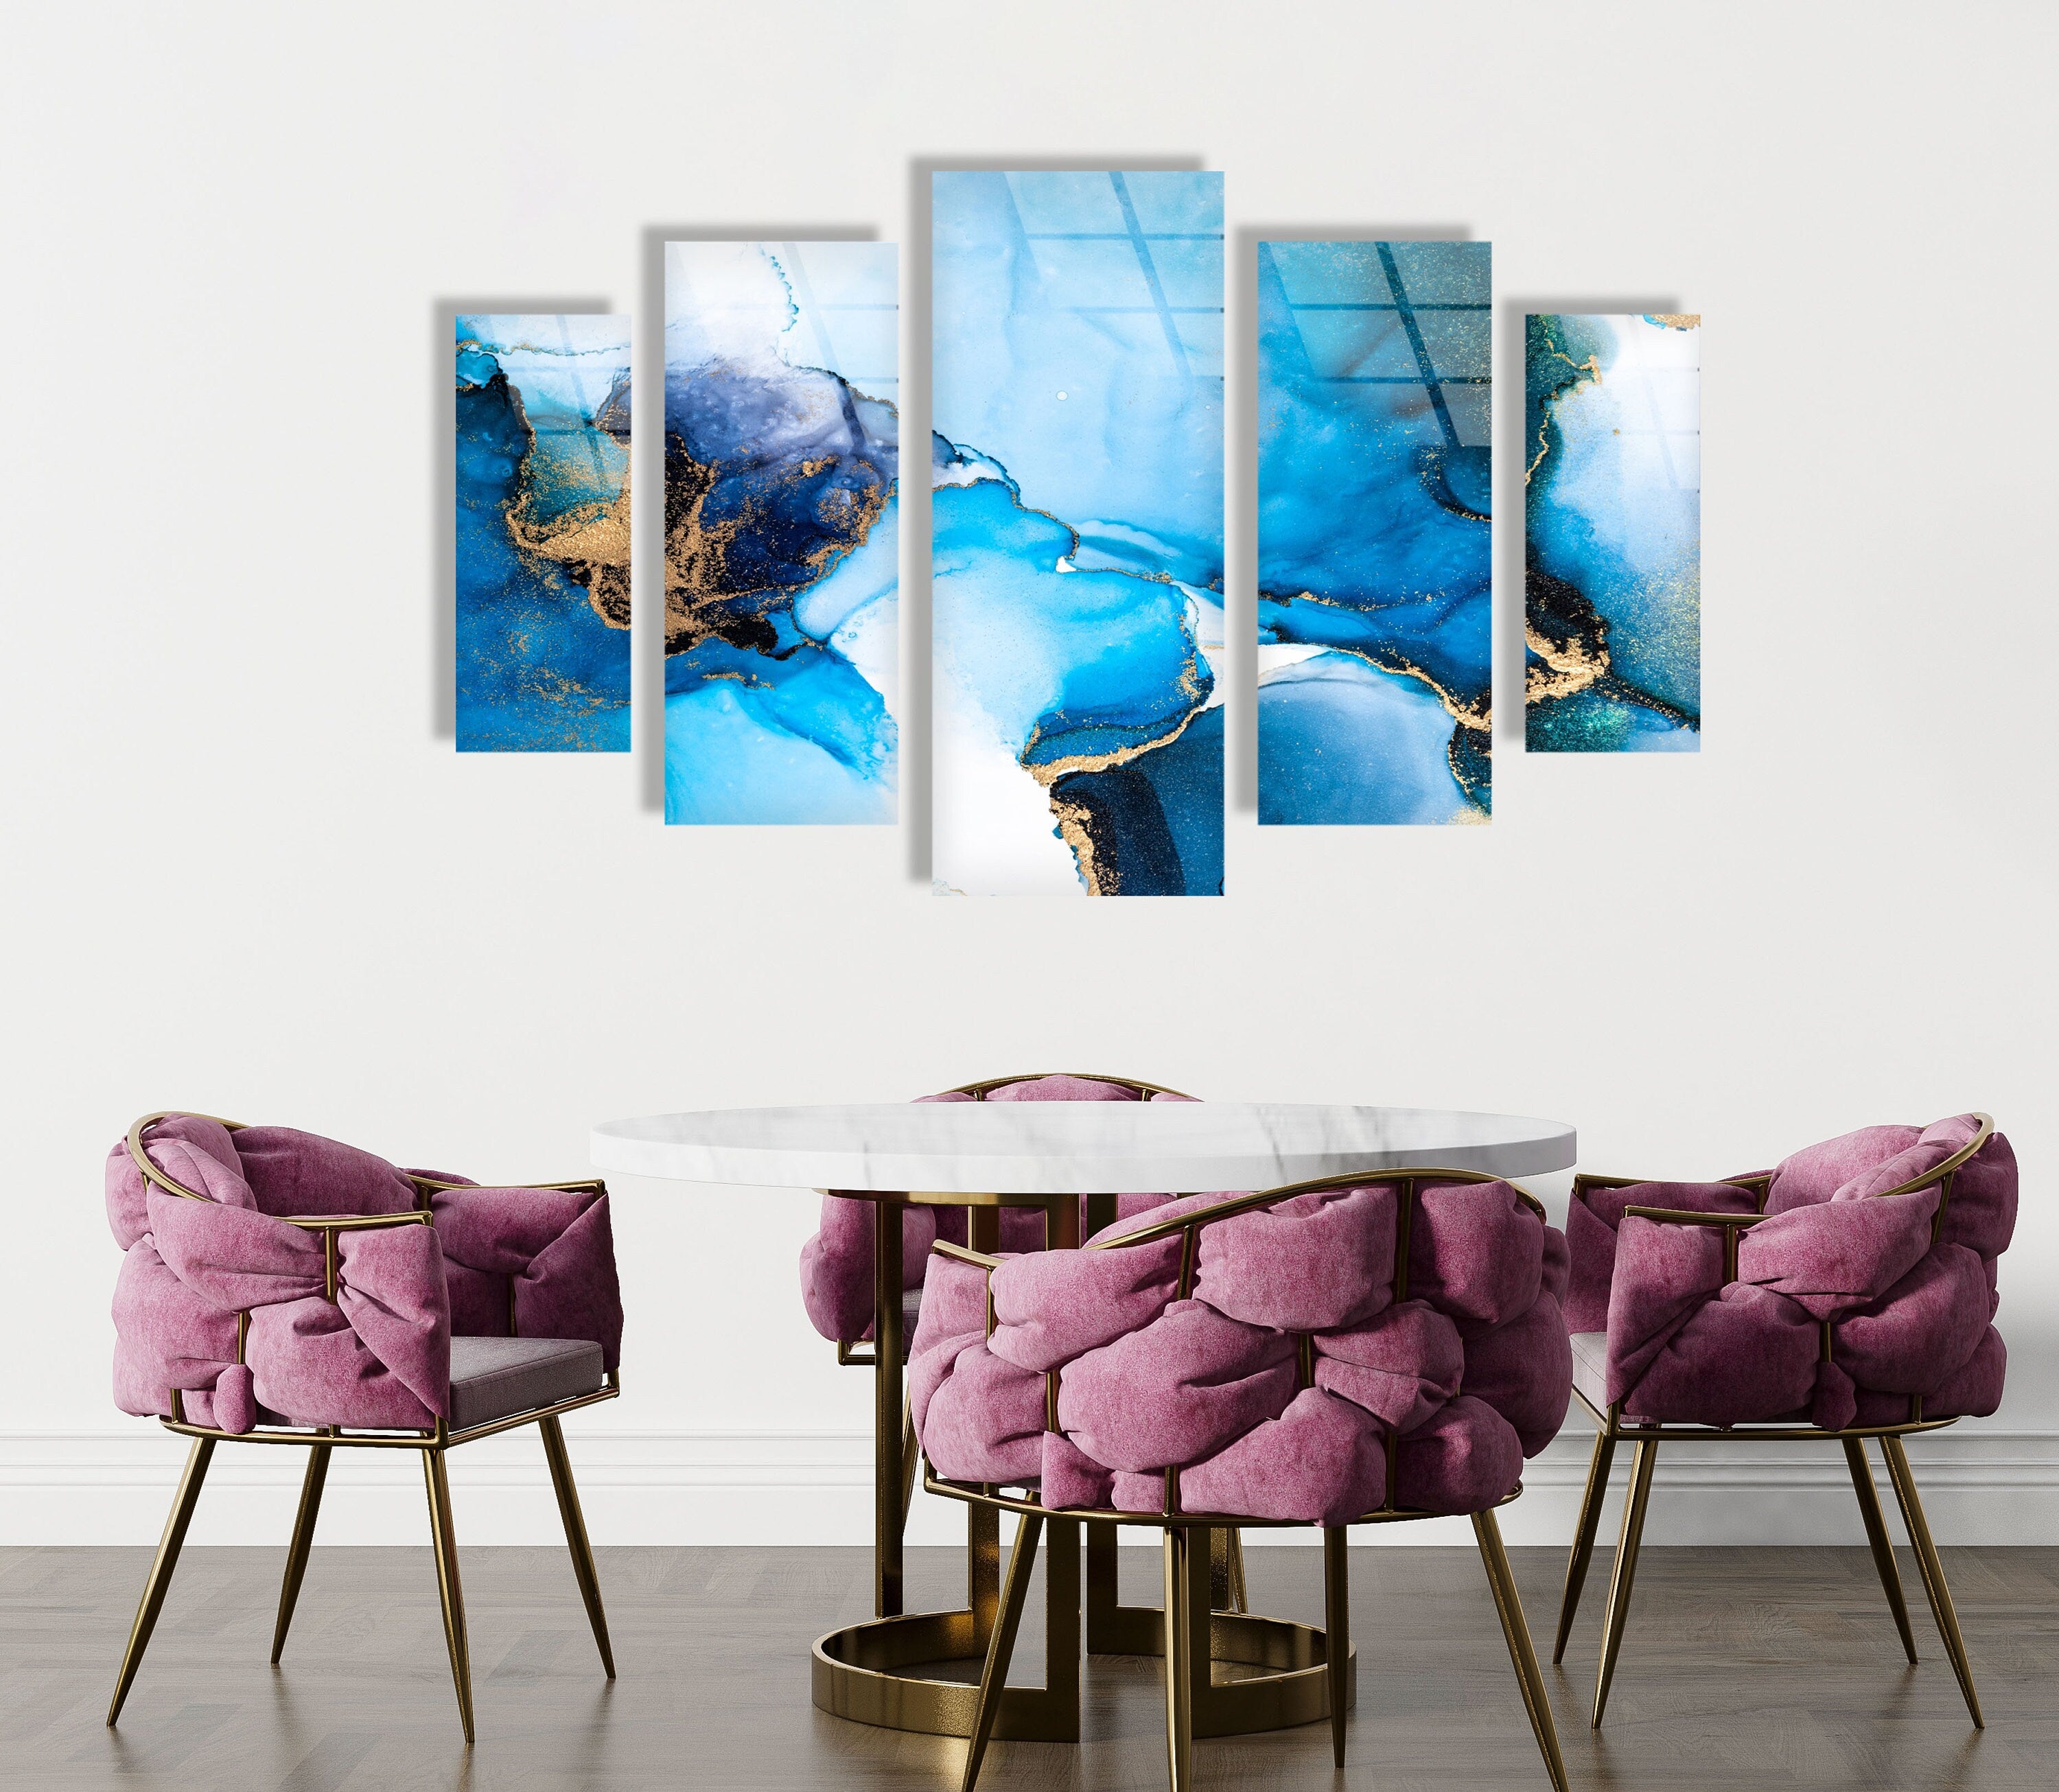 5 Piece White Blue Abstract Tempered Glass Wall Art